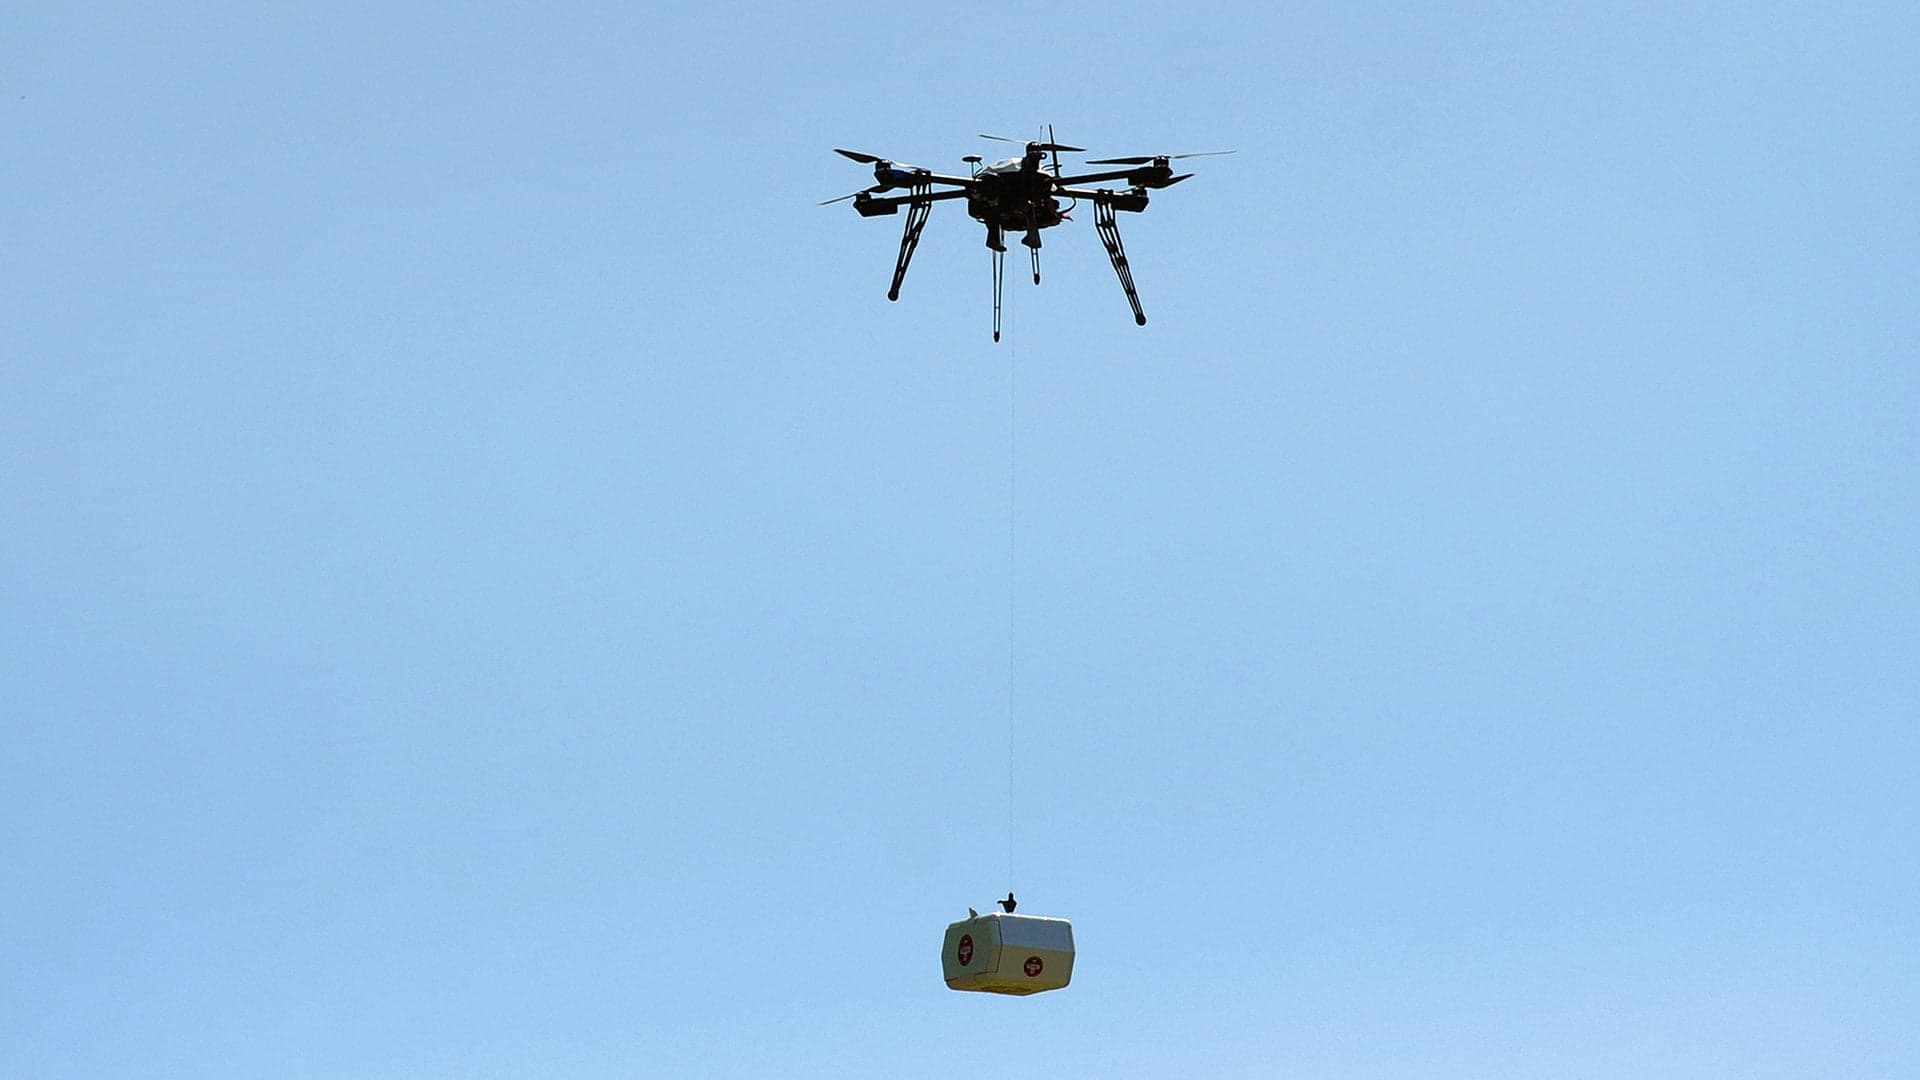 In 2016, Flirtey Made Drone Deliveries in the U.S. a Reality